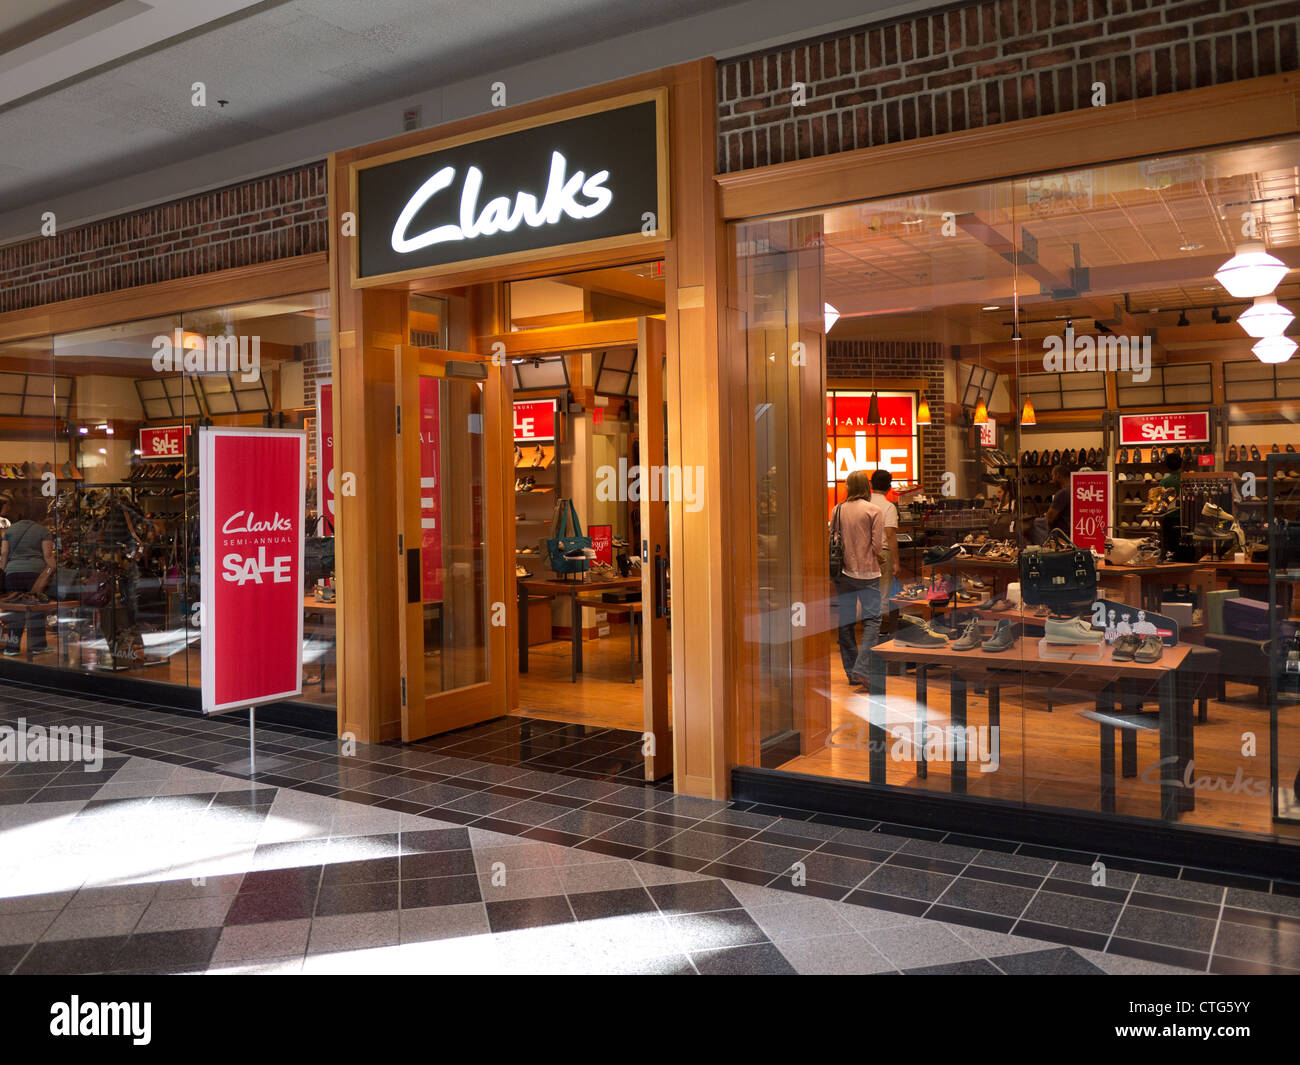 clarks store front Stock Photo - Alamy